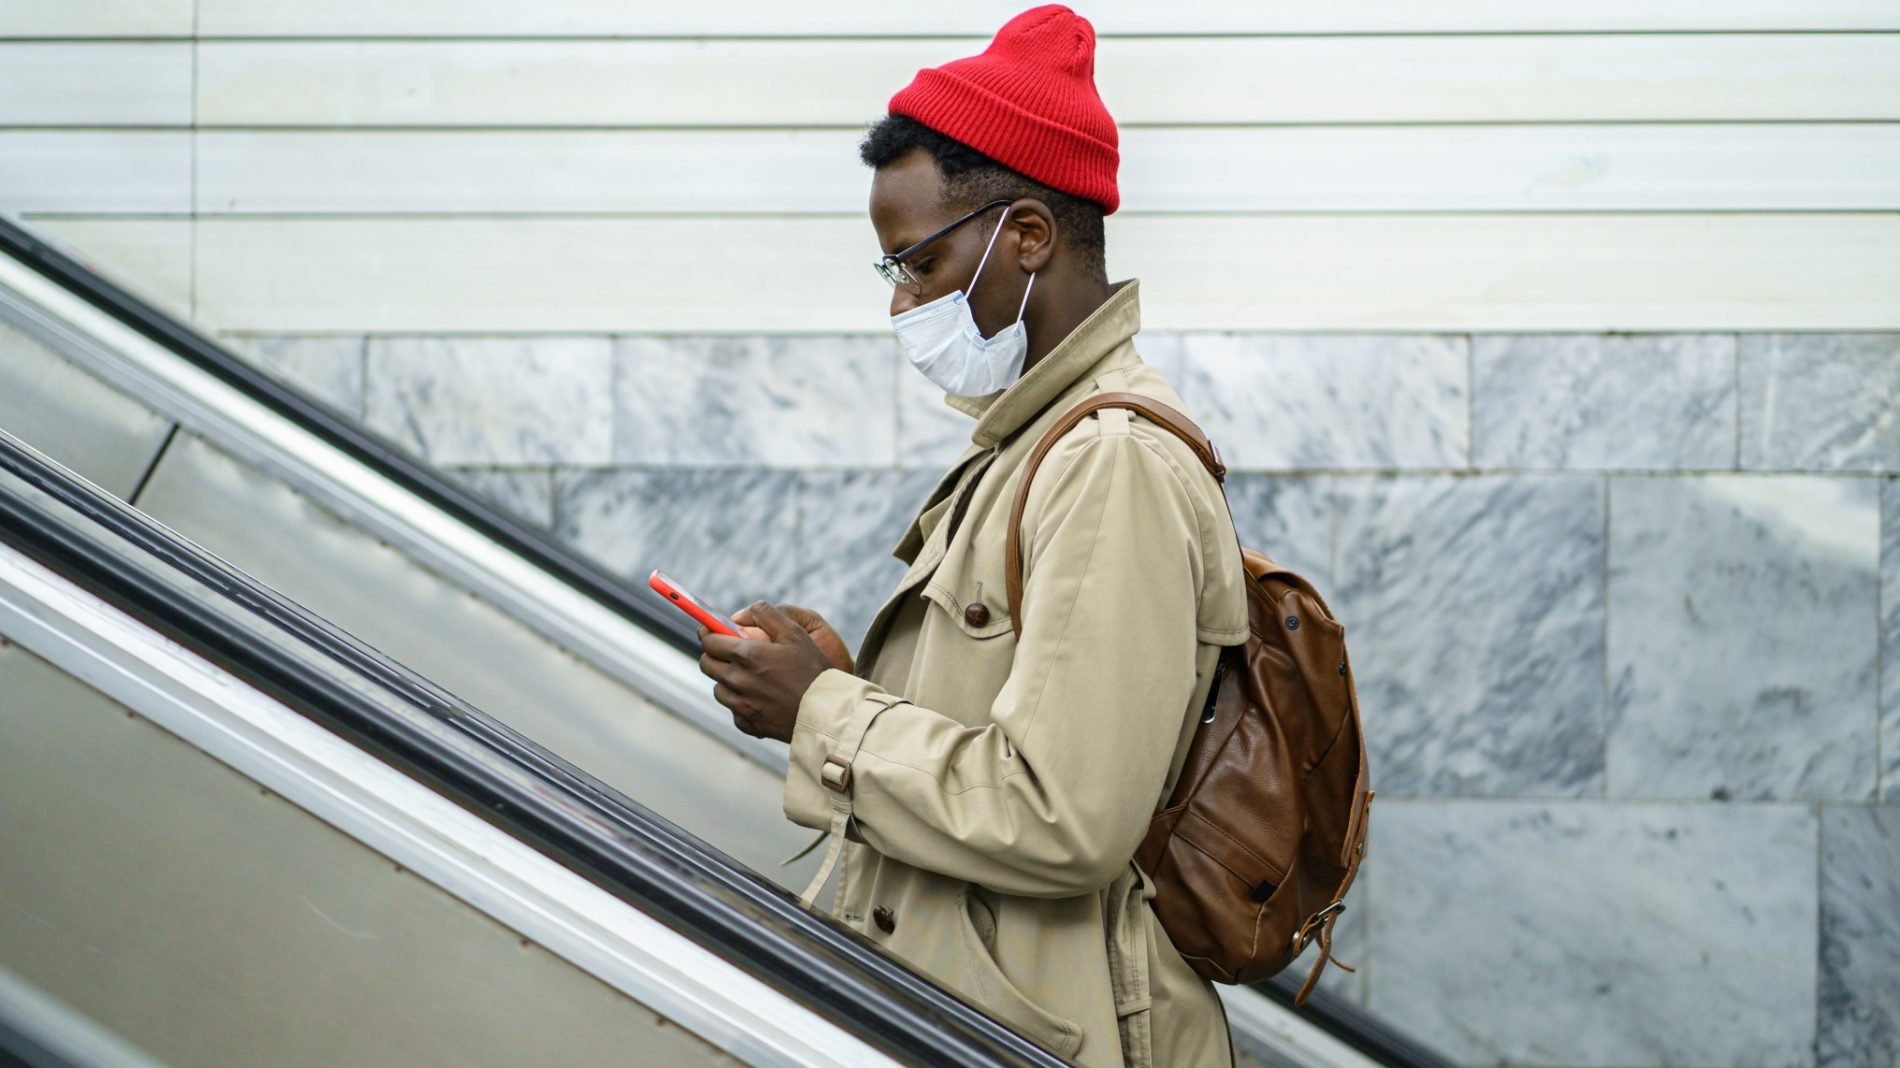 Photo of a person standing on an escalator wearing a face mask and looking at their phone